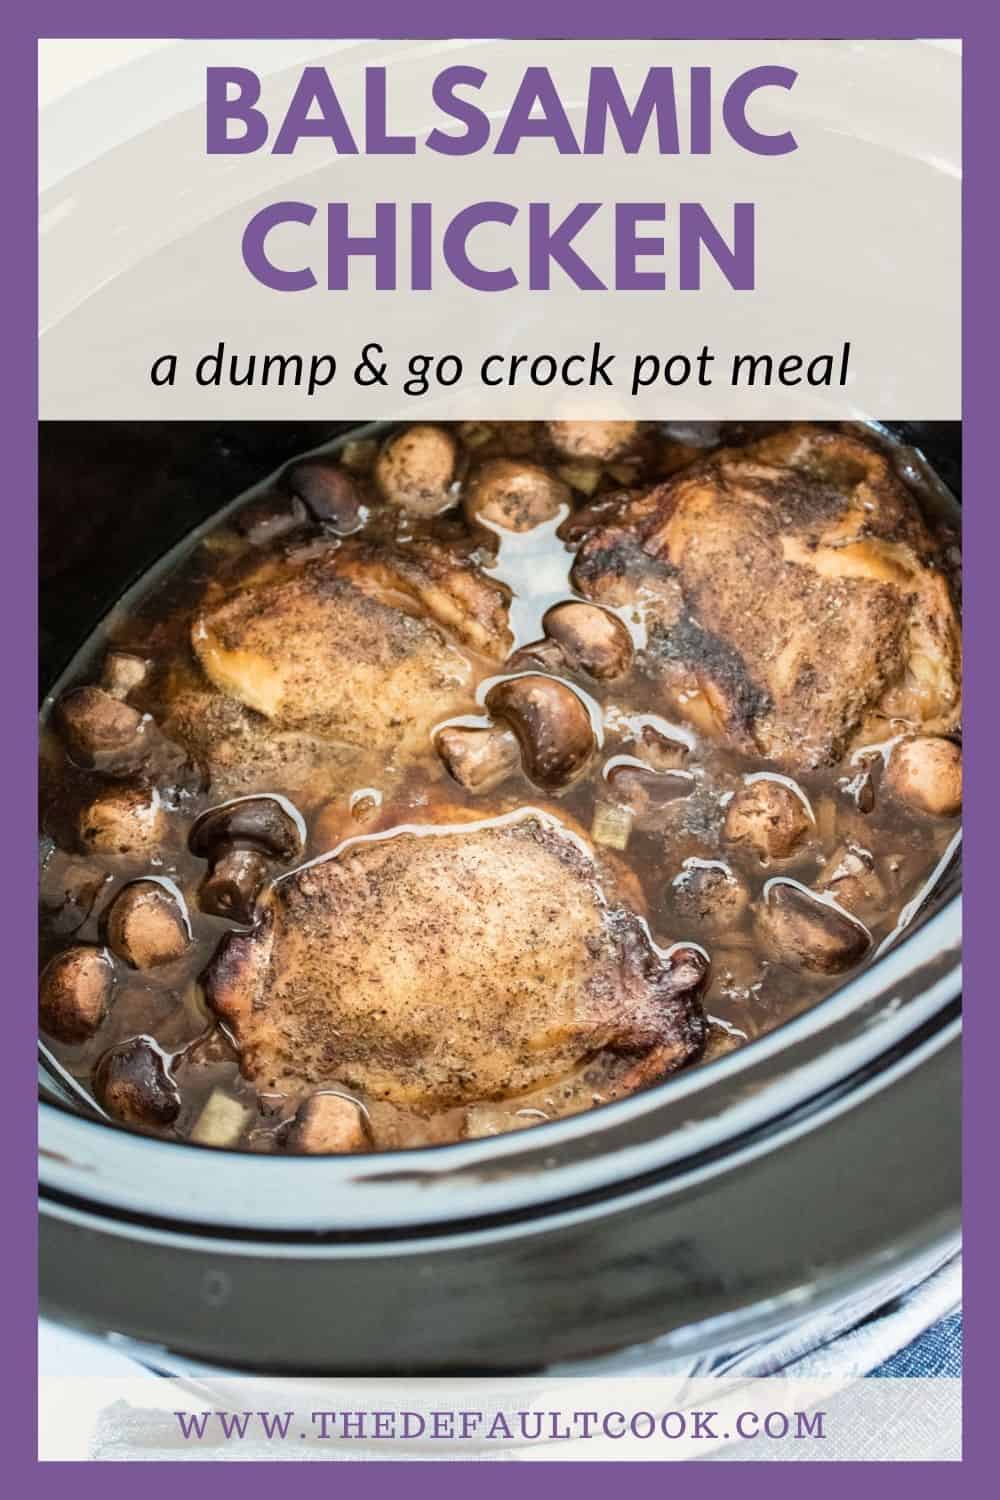 Crockpot with balsamic chicken after cooking, with recipe name above it.